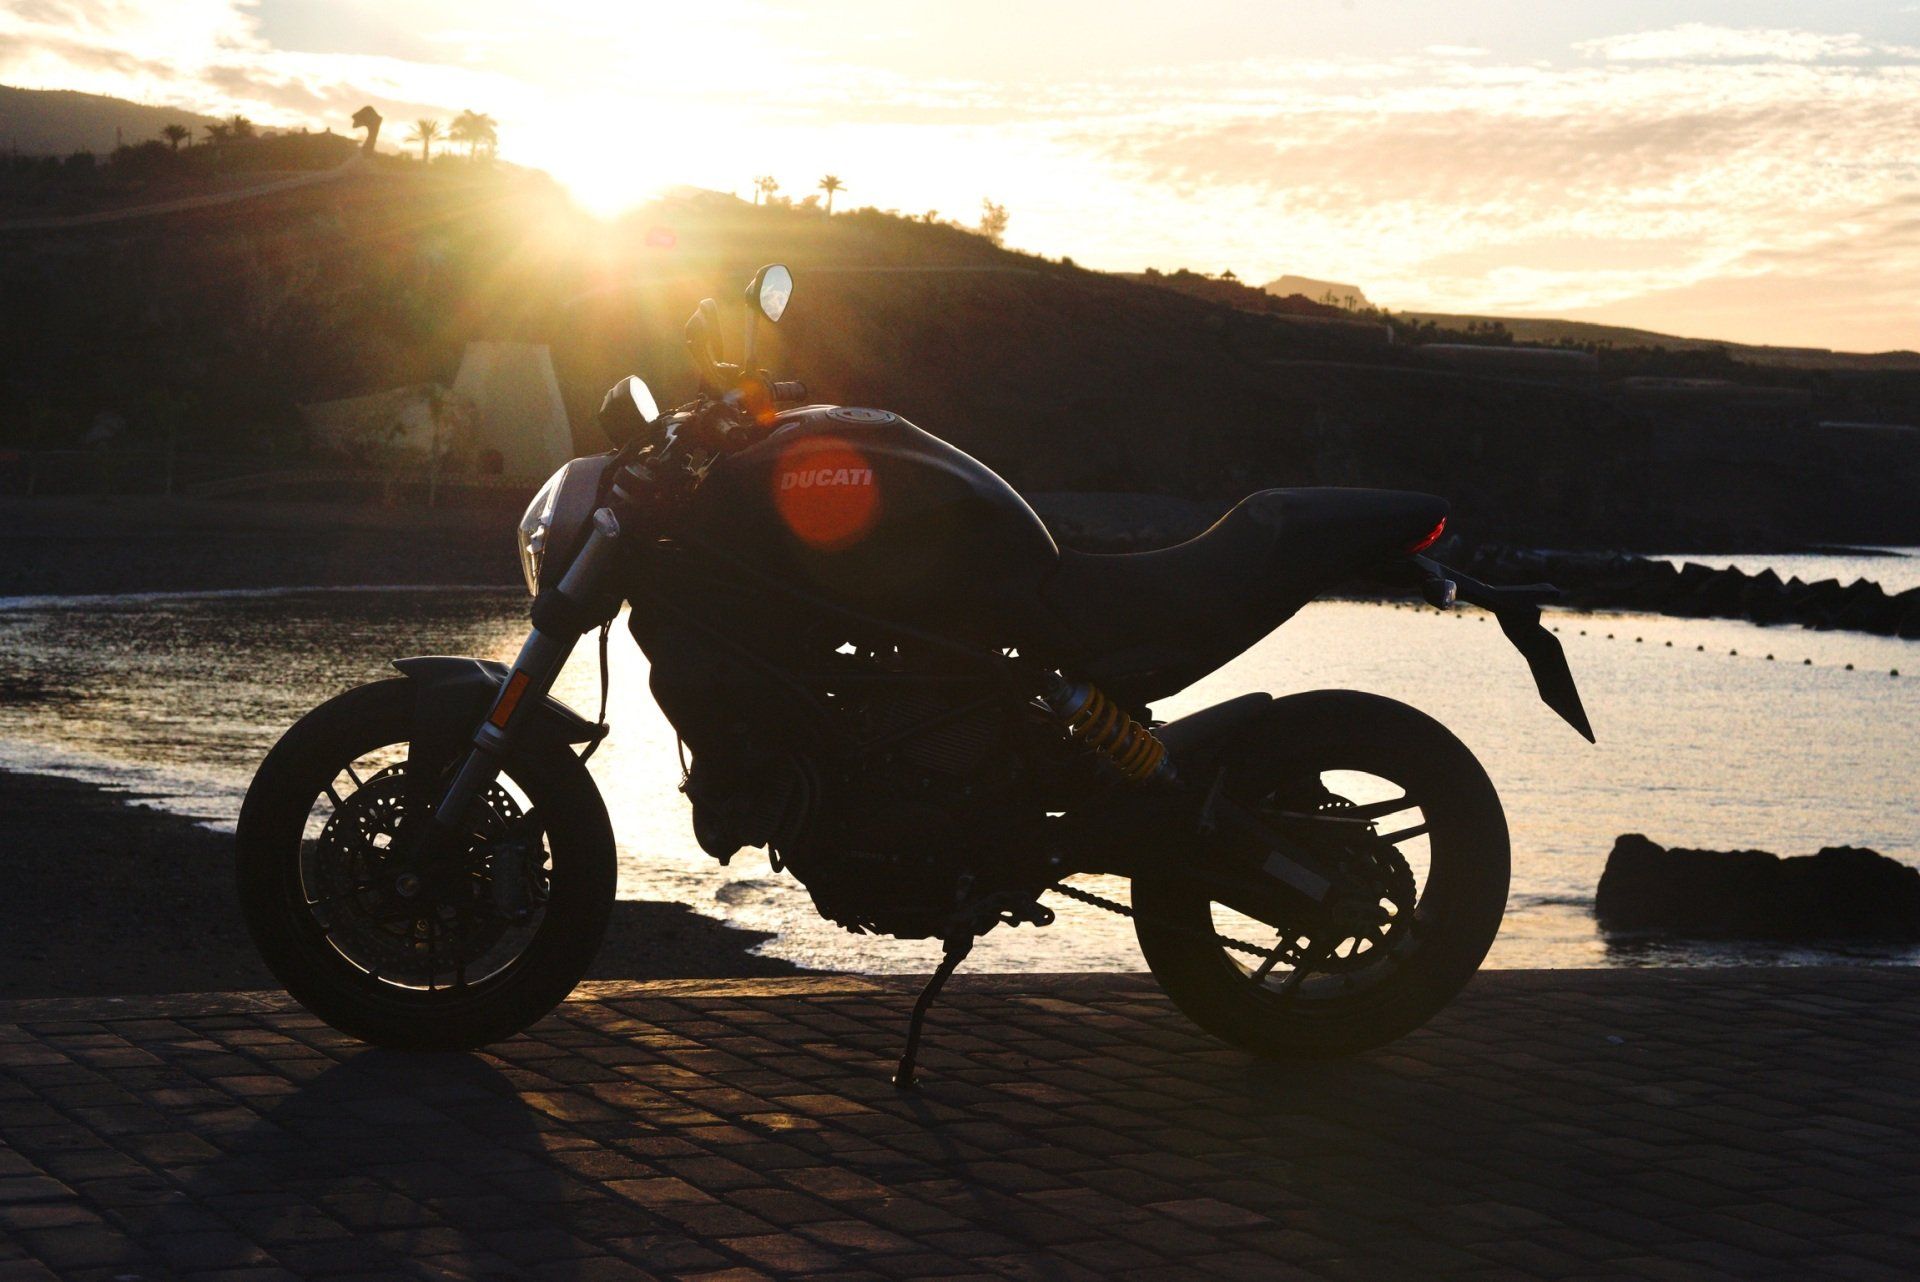 A motorcycle is parked on the side of the road near the water at sunset